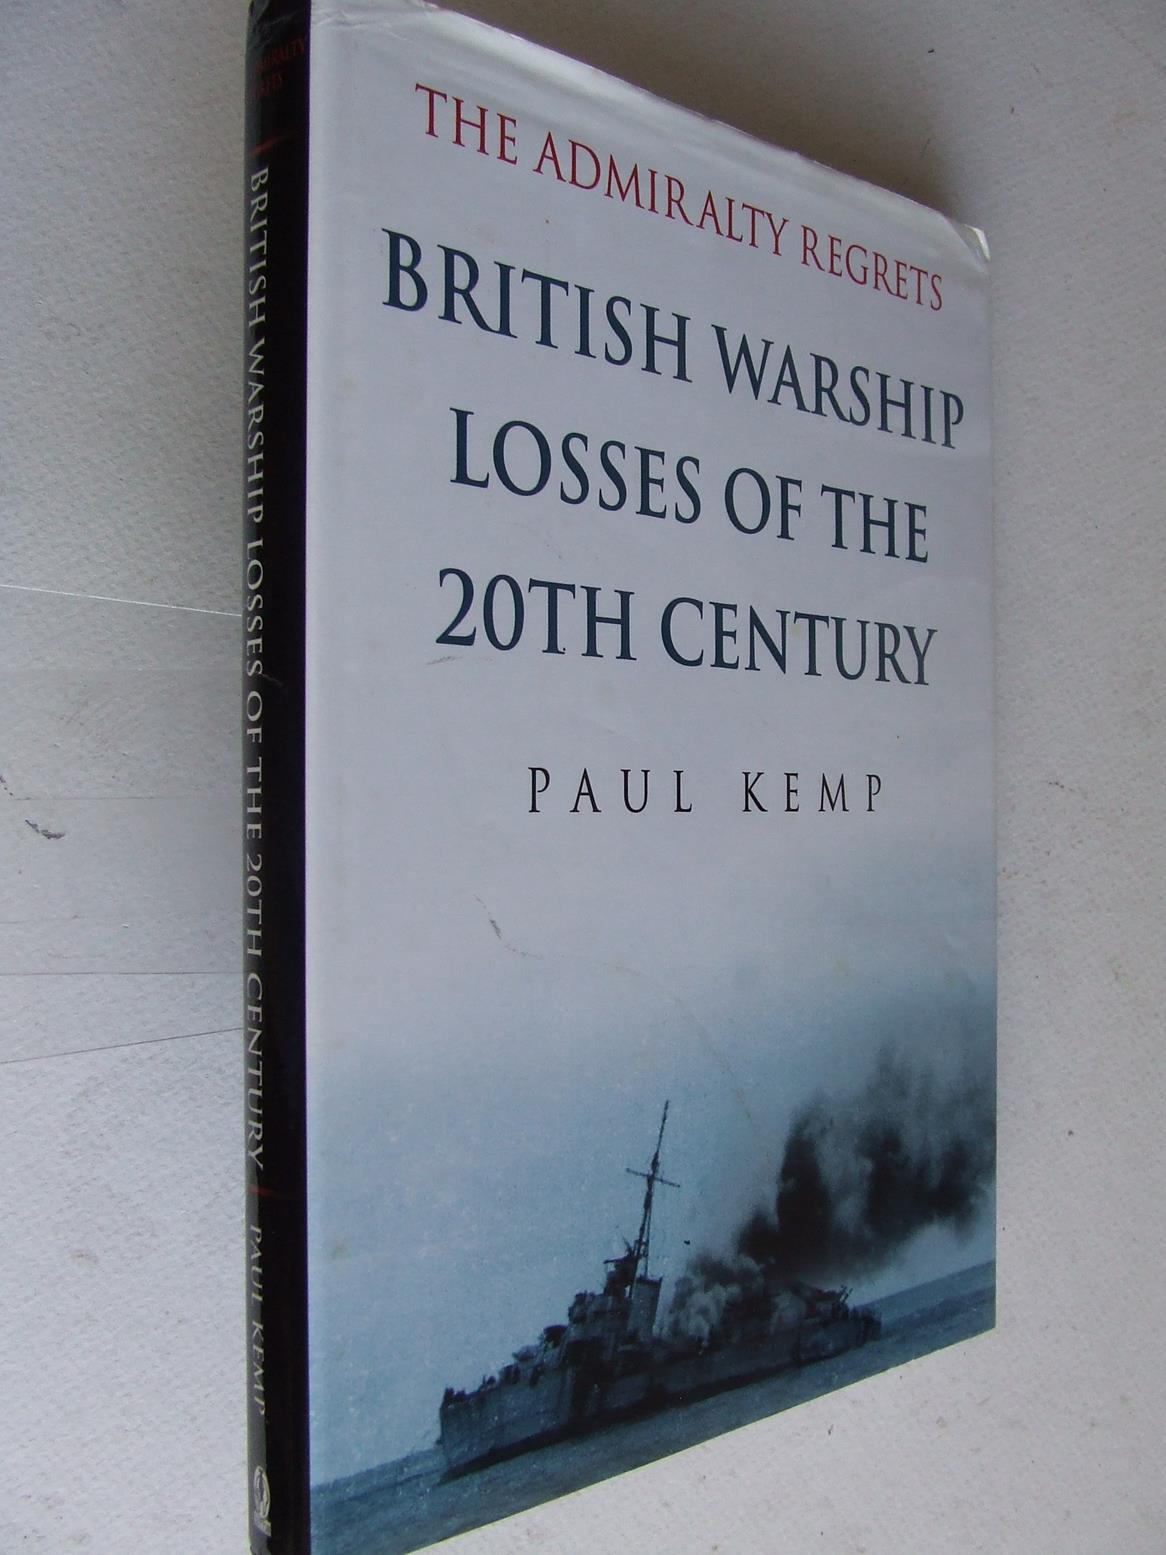 The Admiralty Regrets, British warship losses of the 20th century